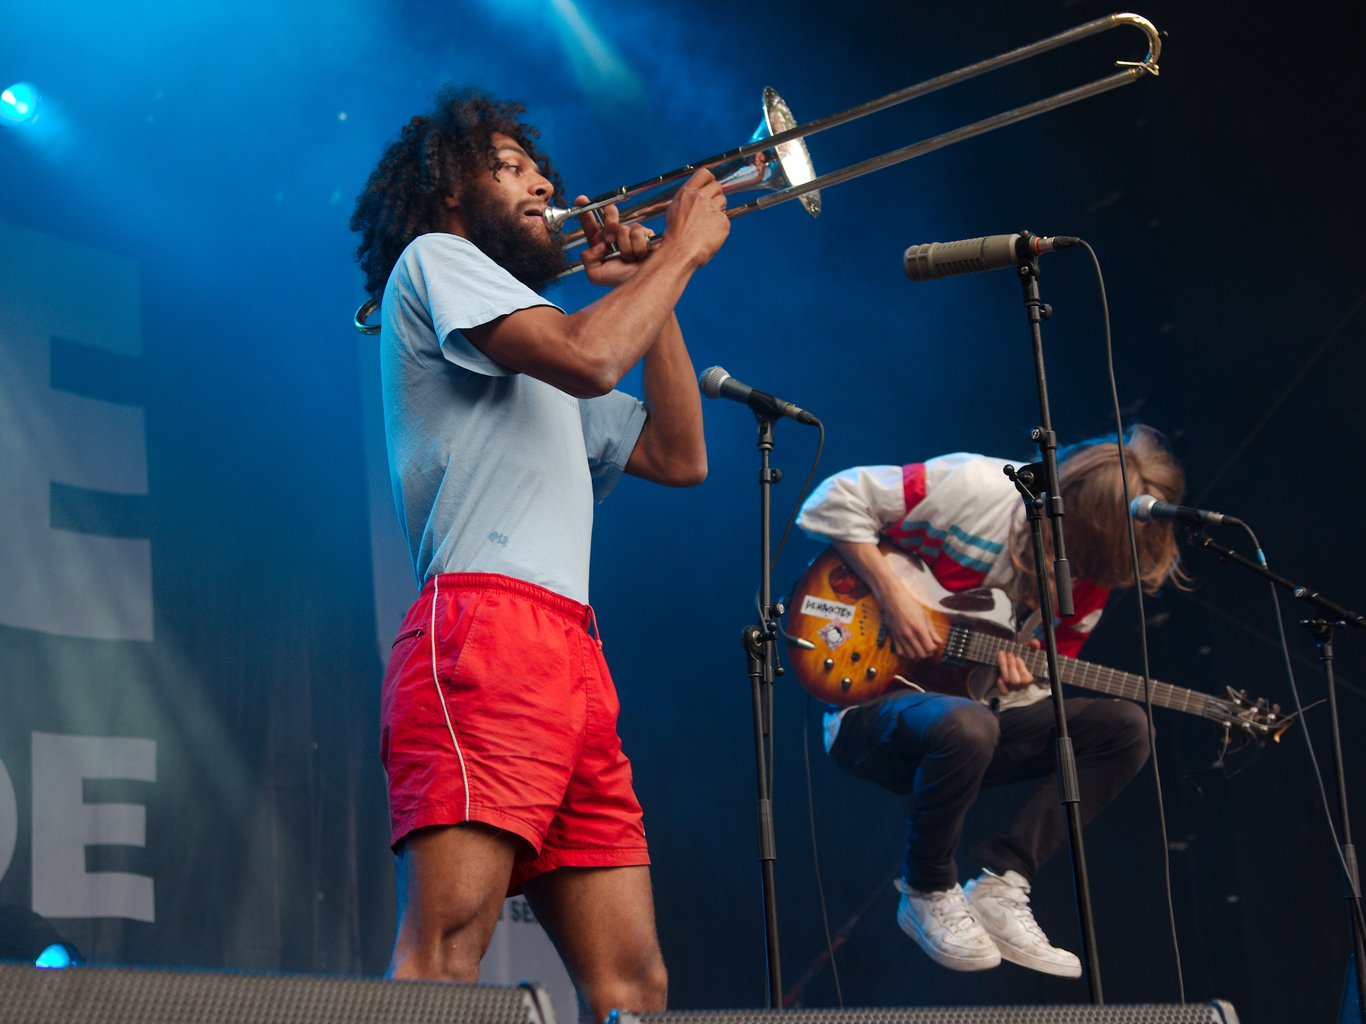 Guy in foreground playing a trombone, guitarist in background is in the middle of a jump, legs drawn to his body